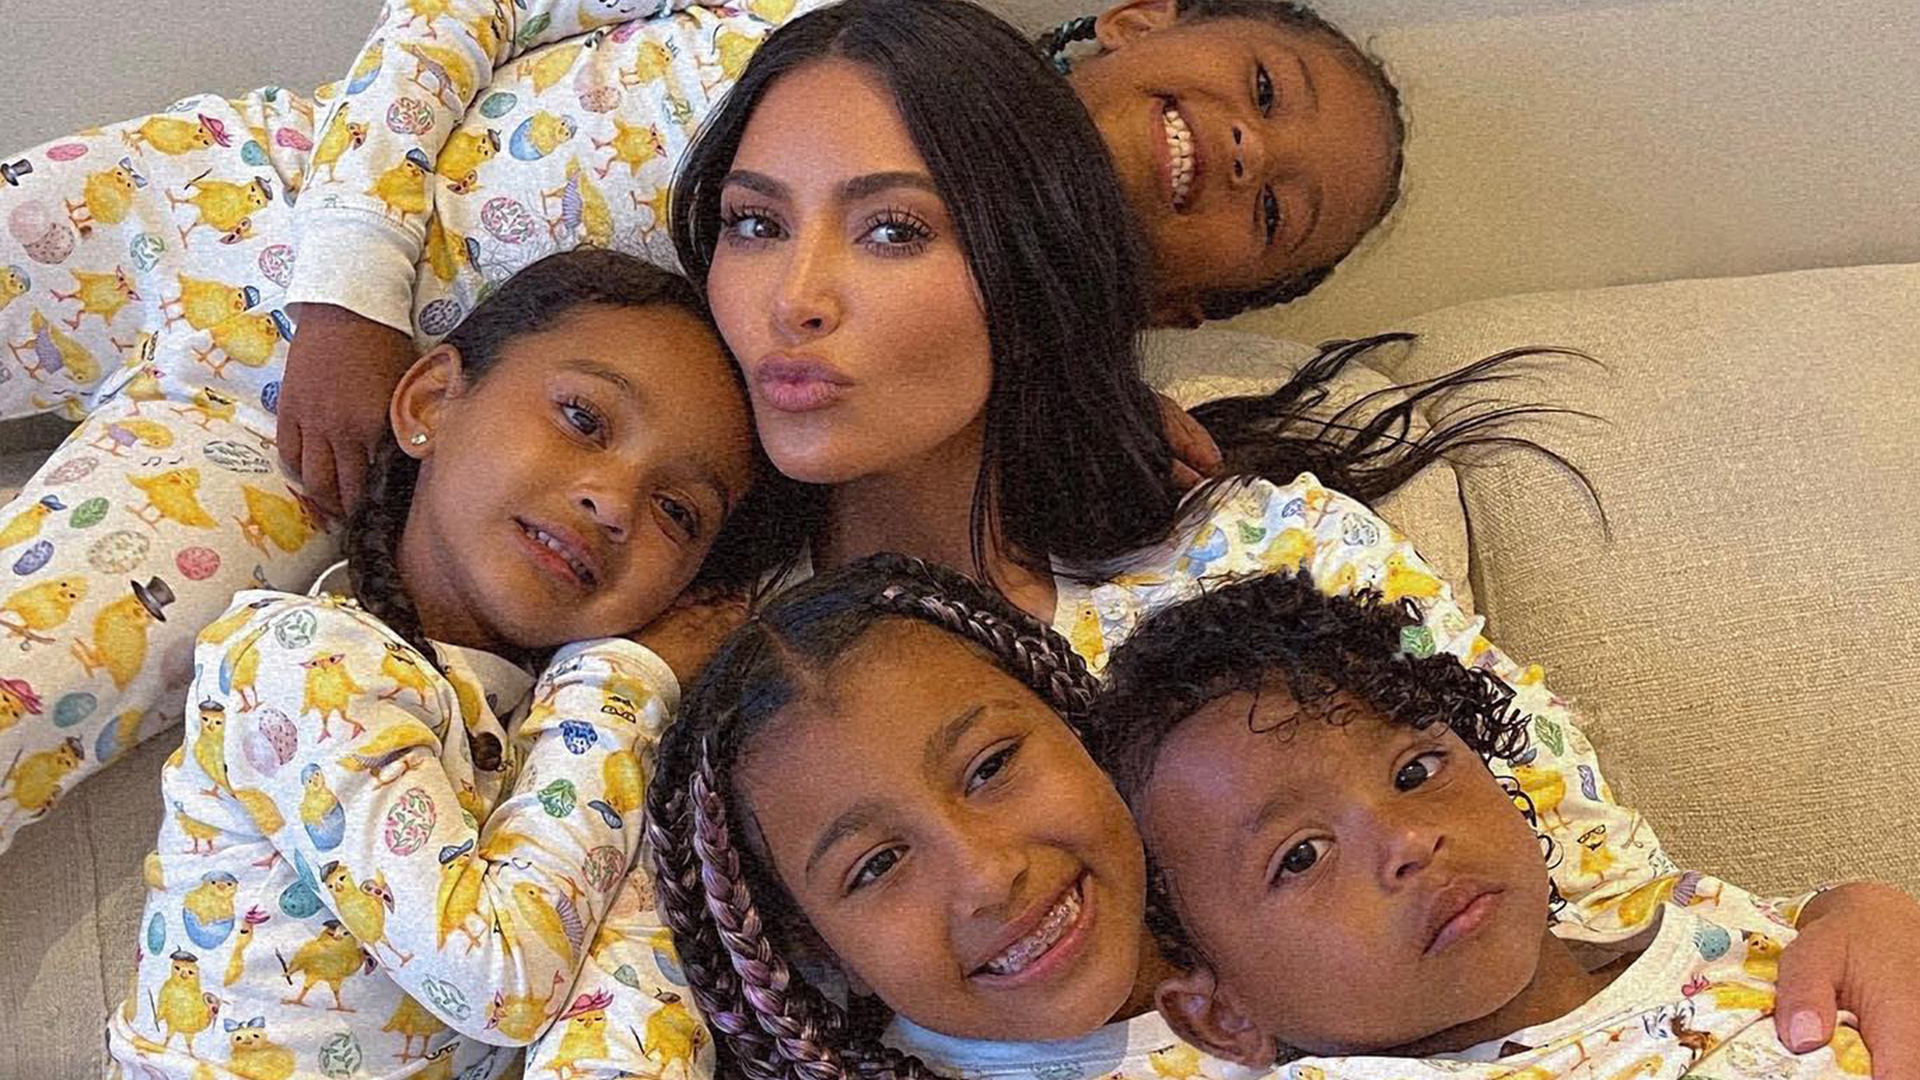 Kim poses with all four kids in rare family pic amid divorce from Kanye